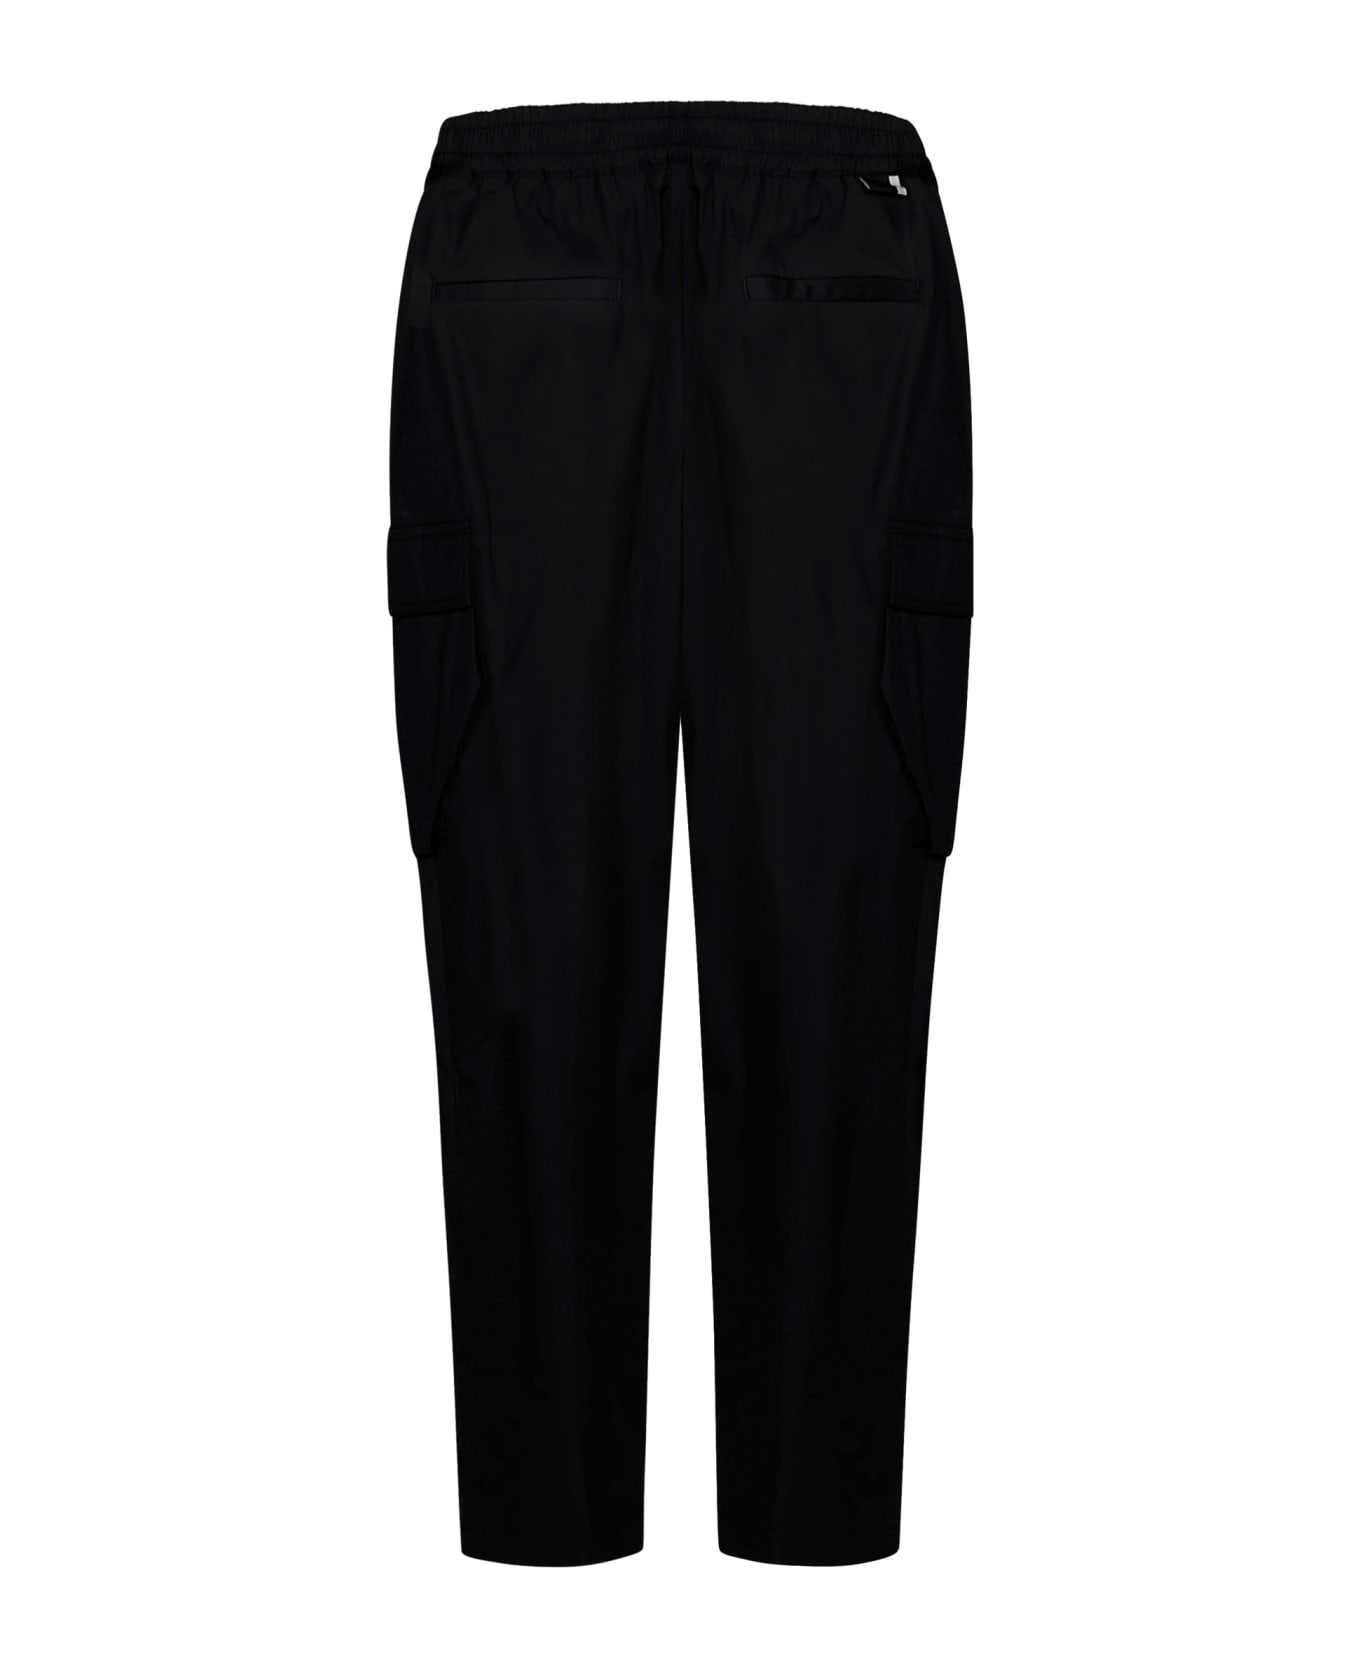 Low Brand Trousers - Black ボトムス